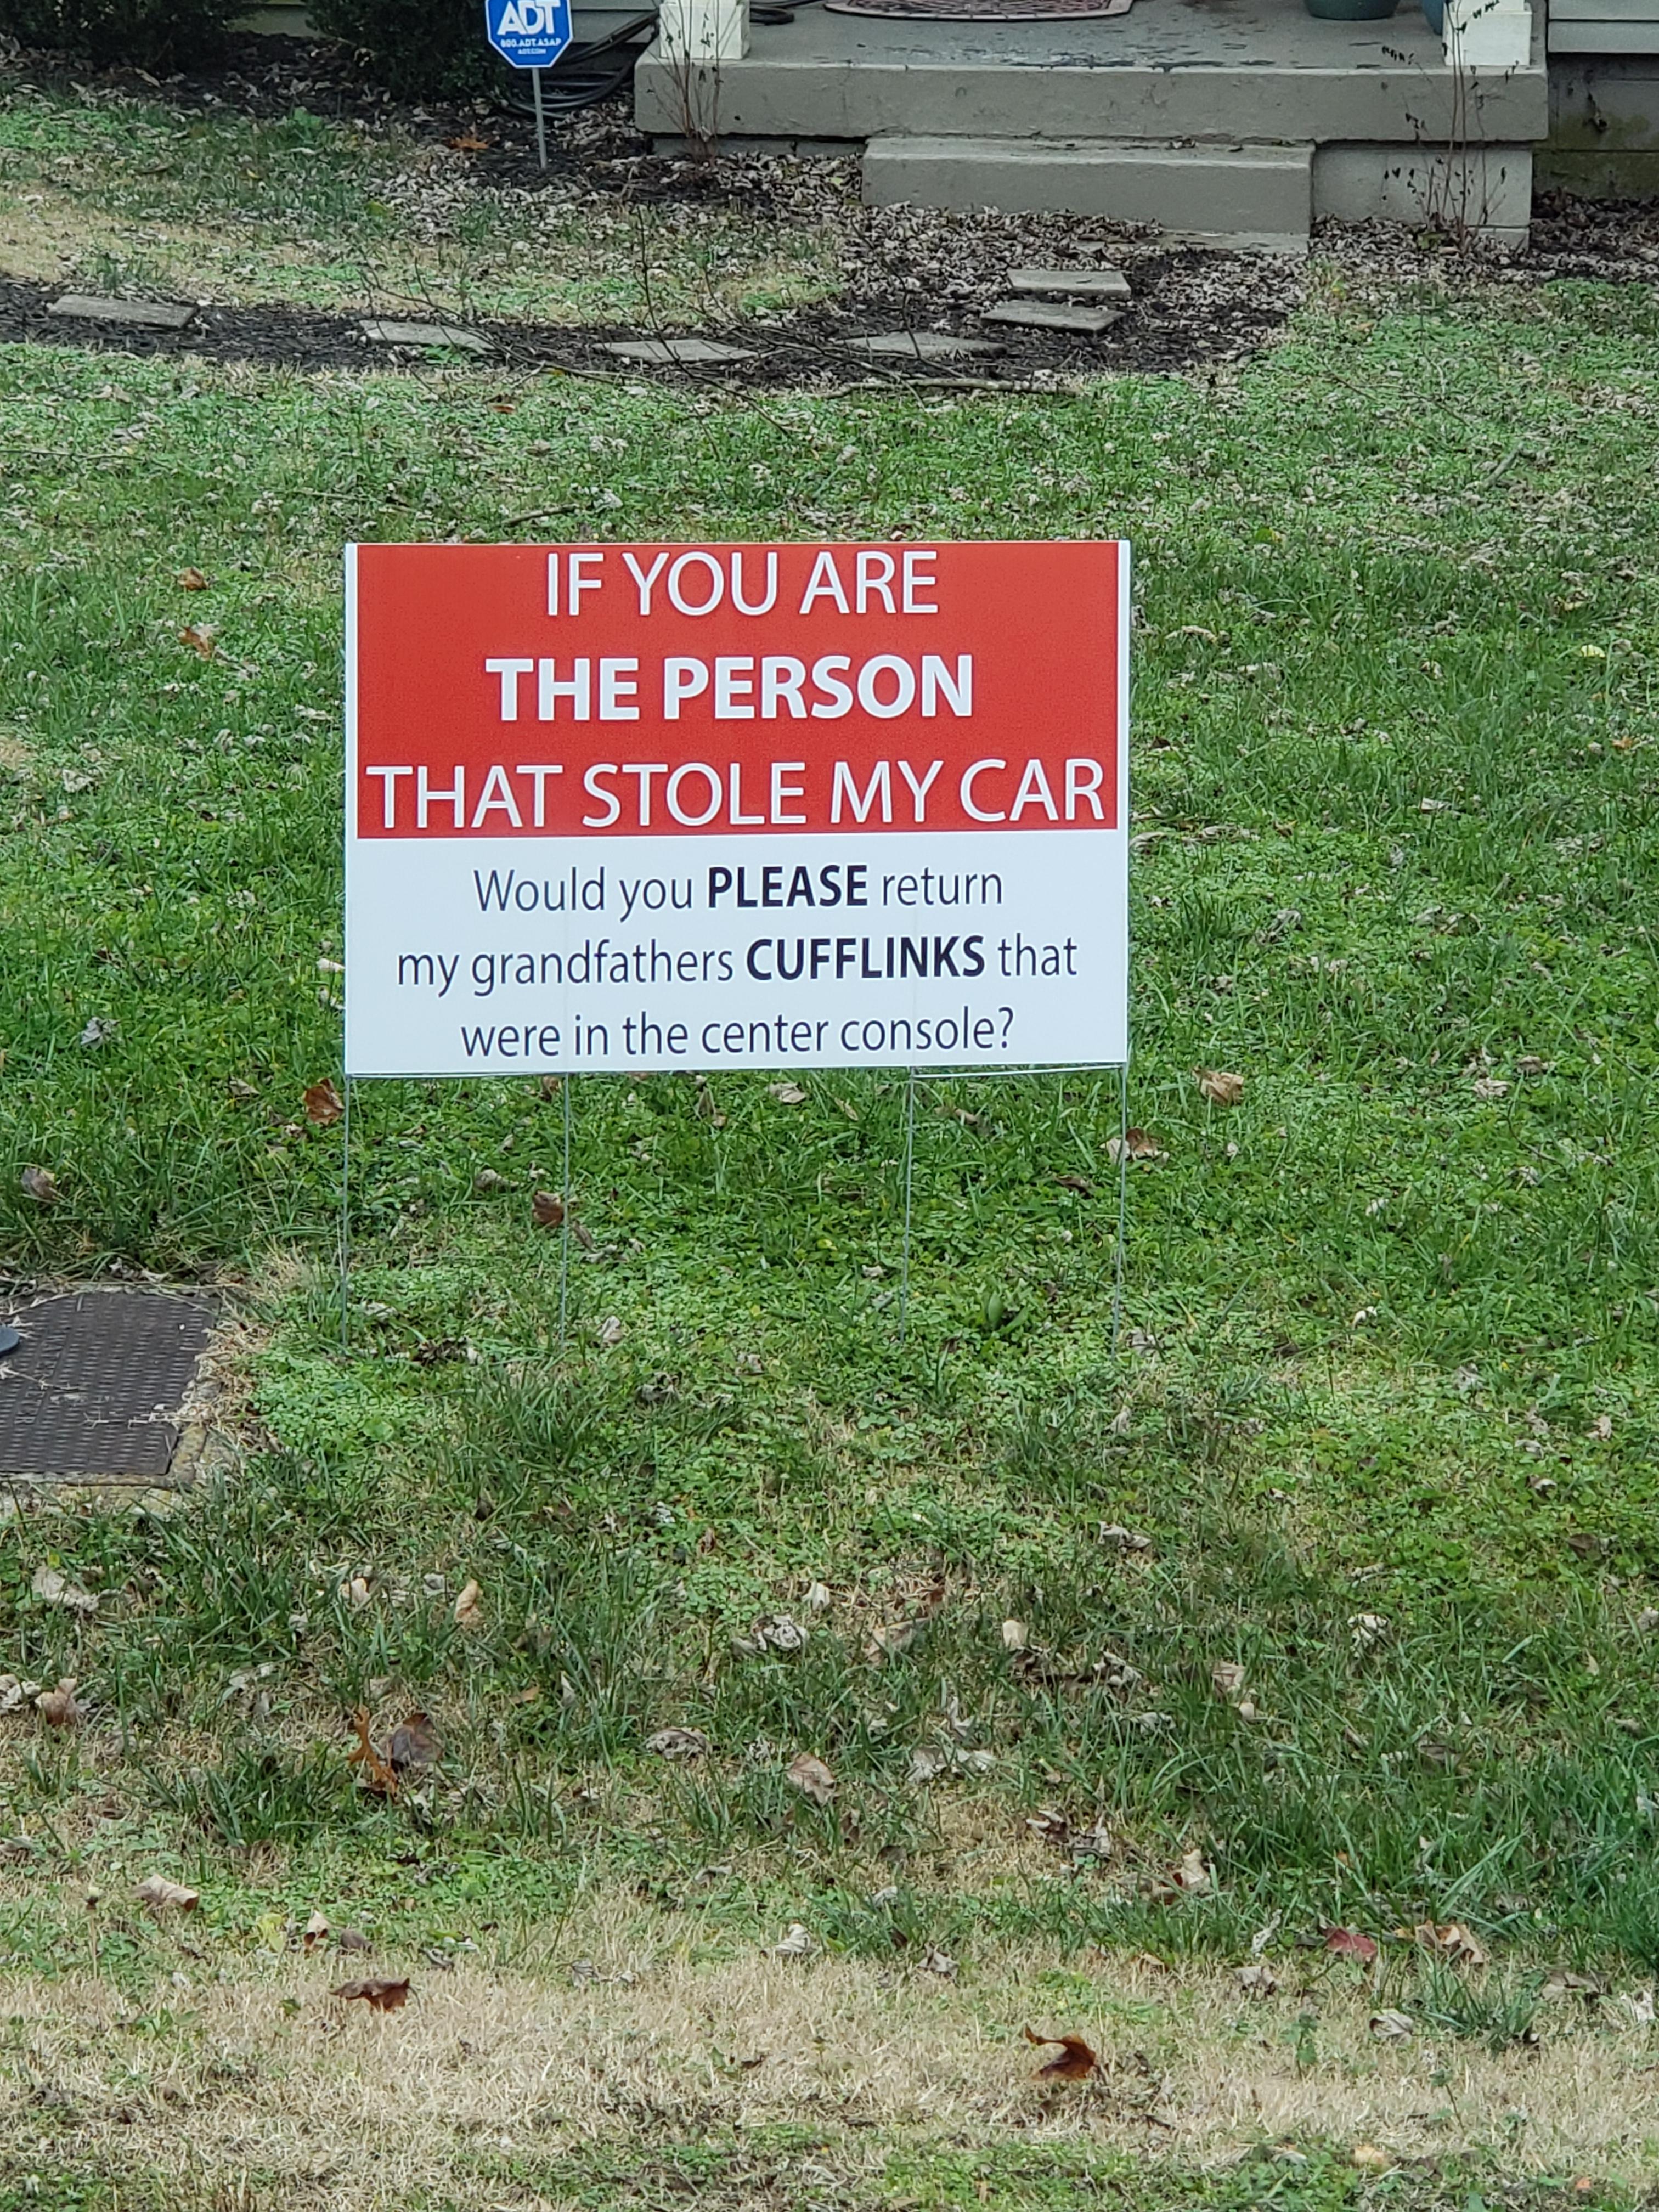 memes - grass - If You Are The Person That Stole My Car Would you Please return my grandfathers Cufflinks that were in the center console?